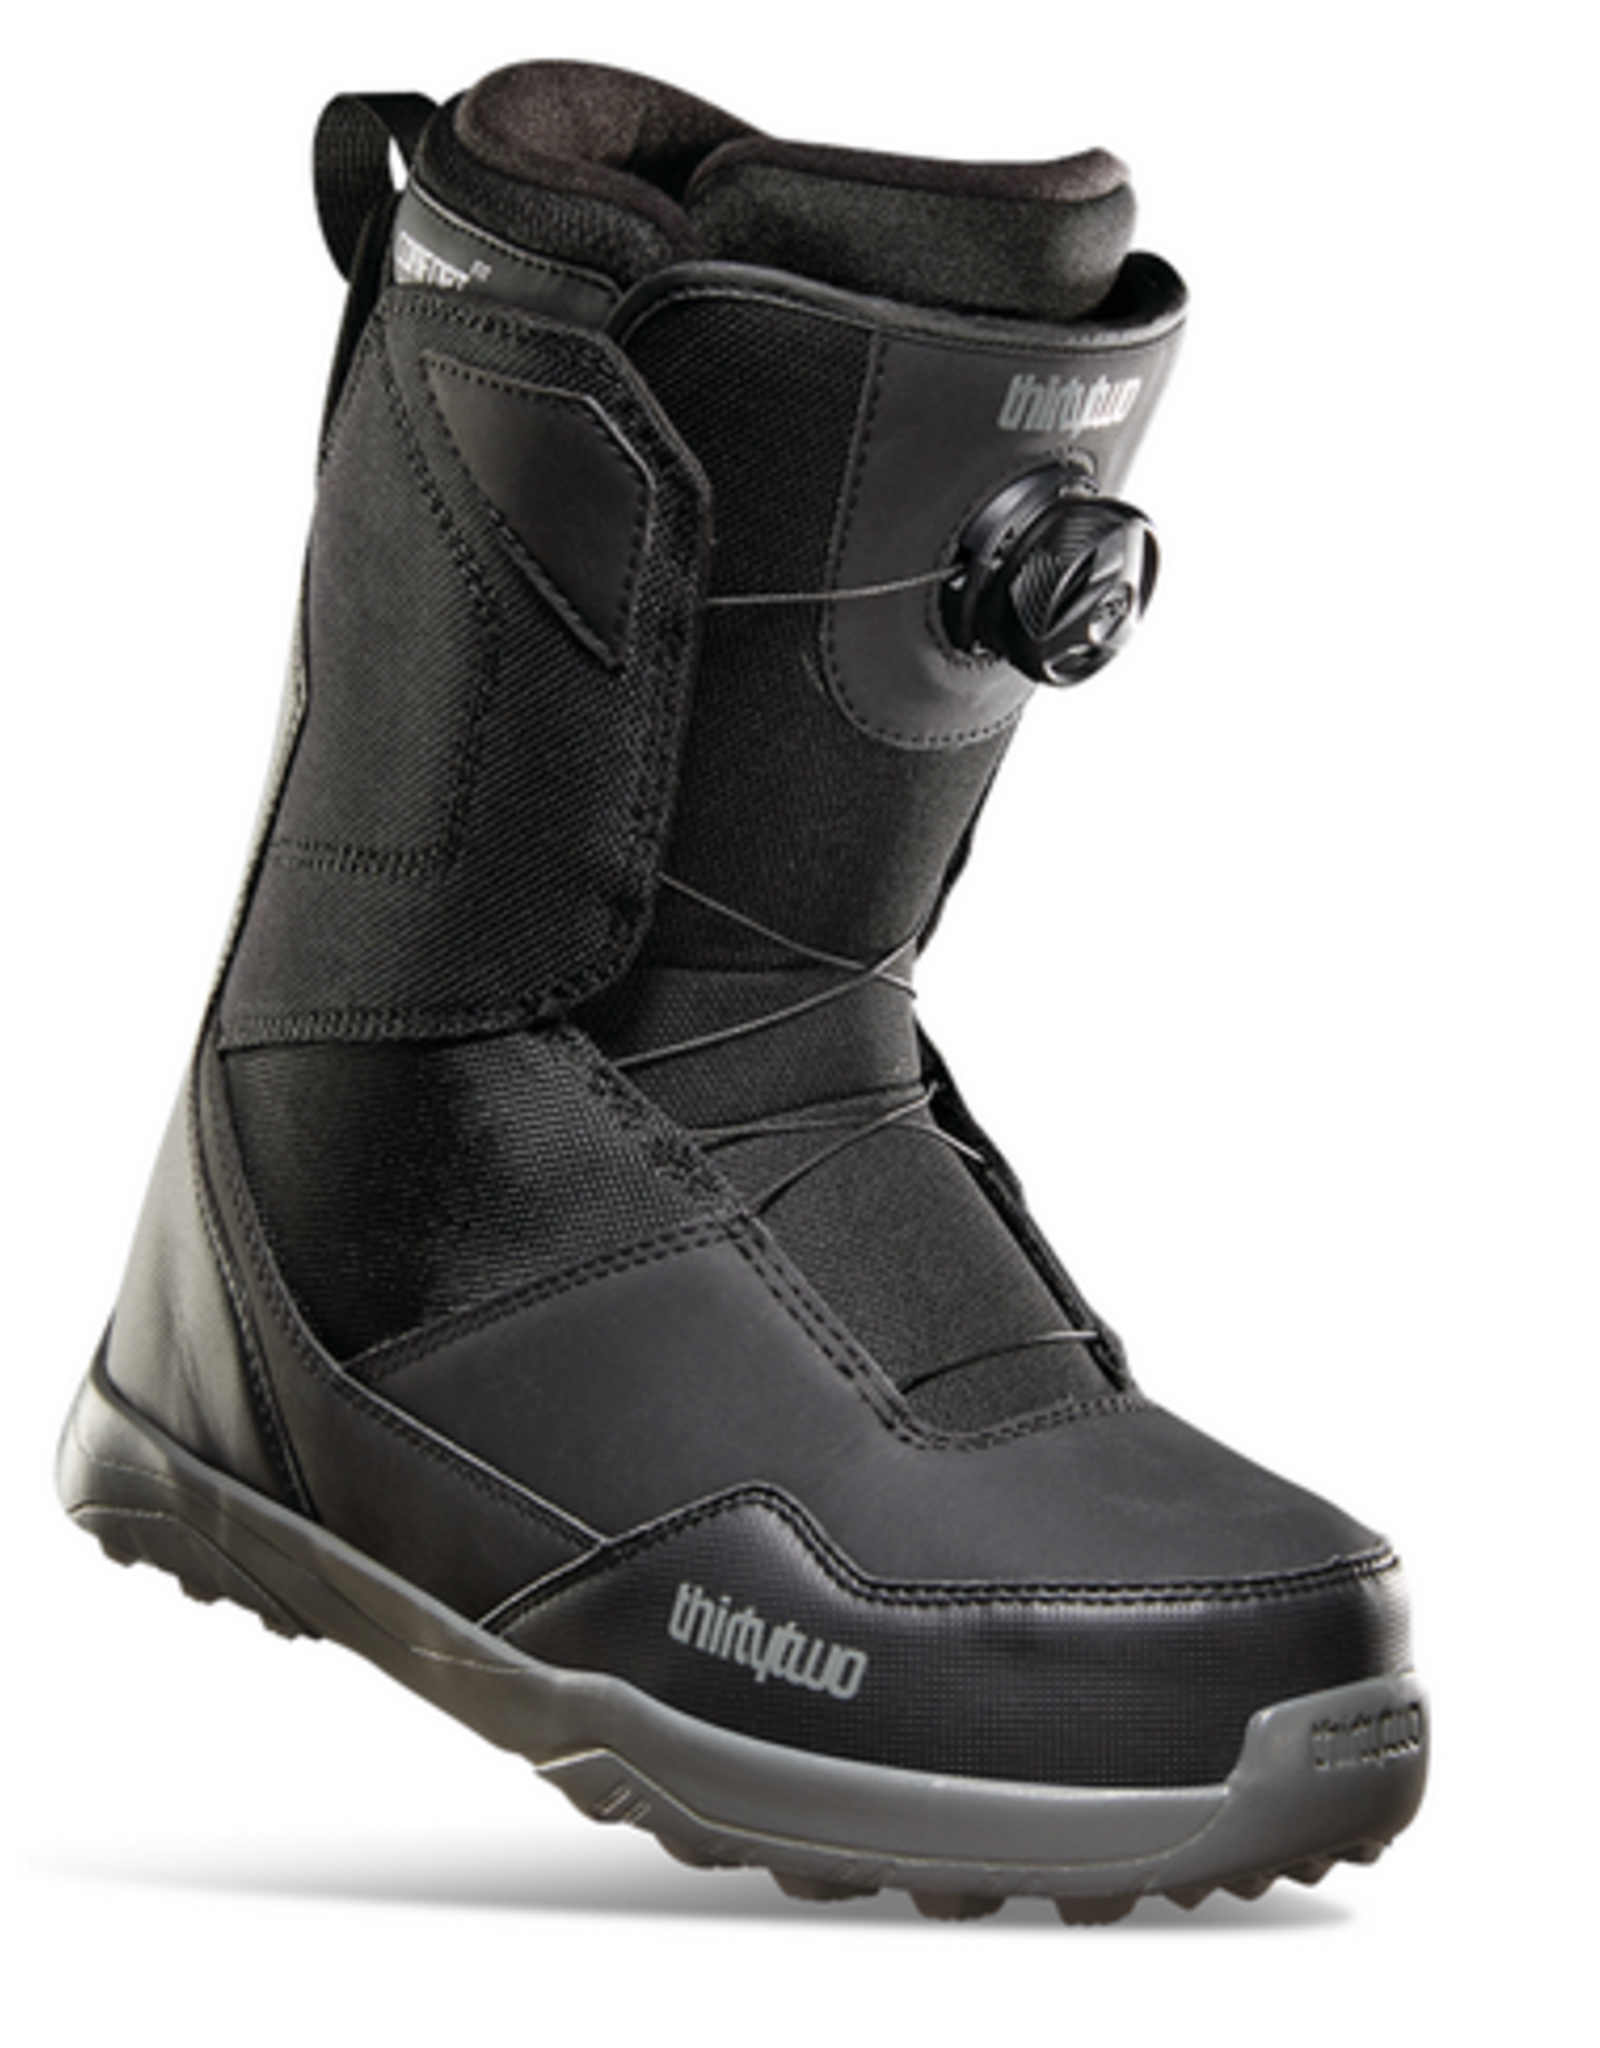 32 THIRTY TWO 2023 SHIFTY BOA SNOWBOARD BOOTS